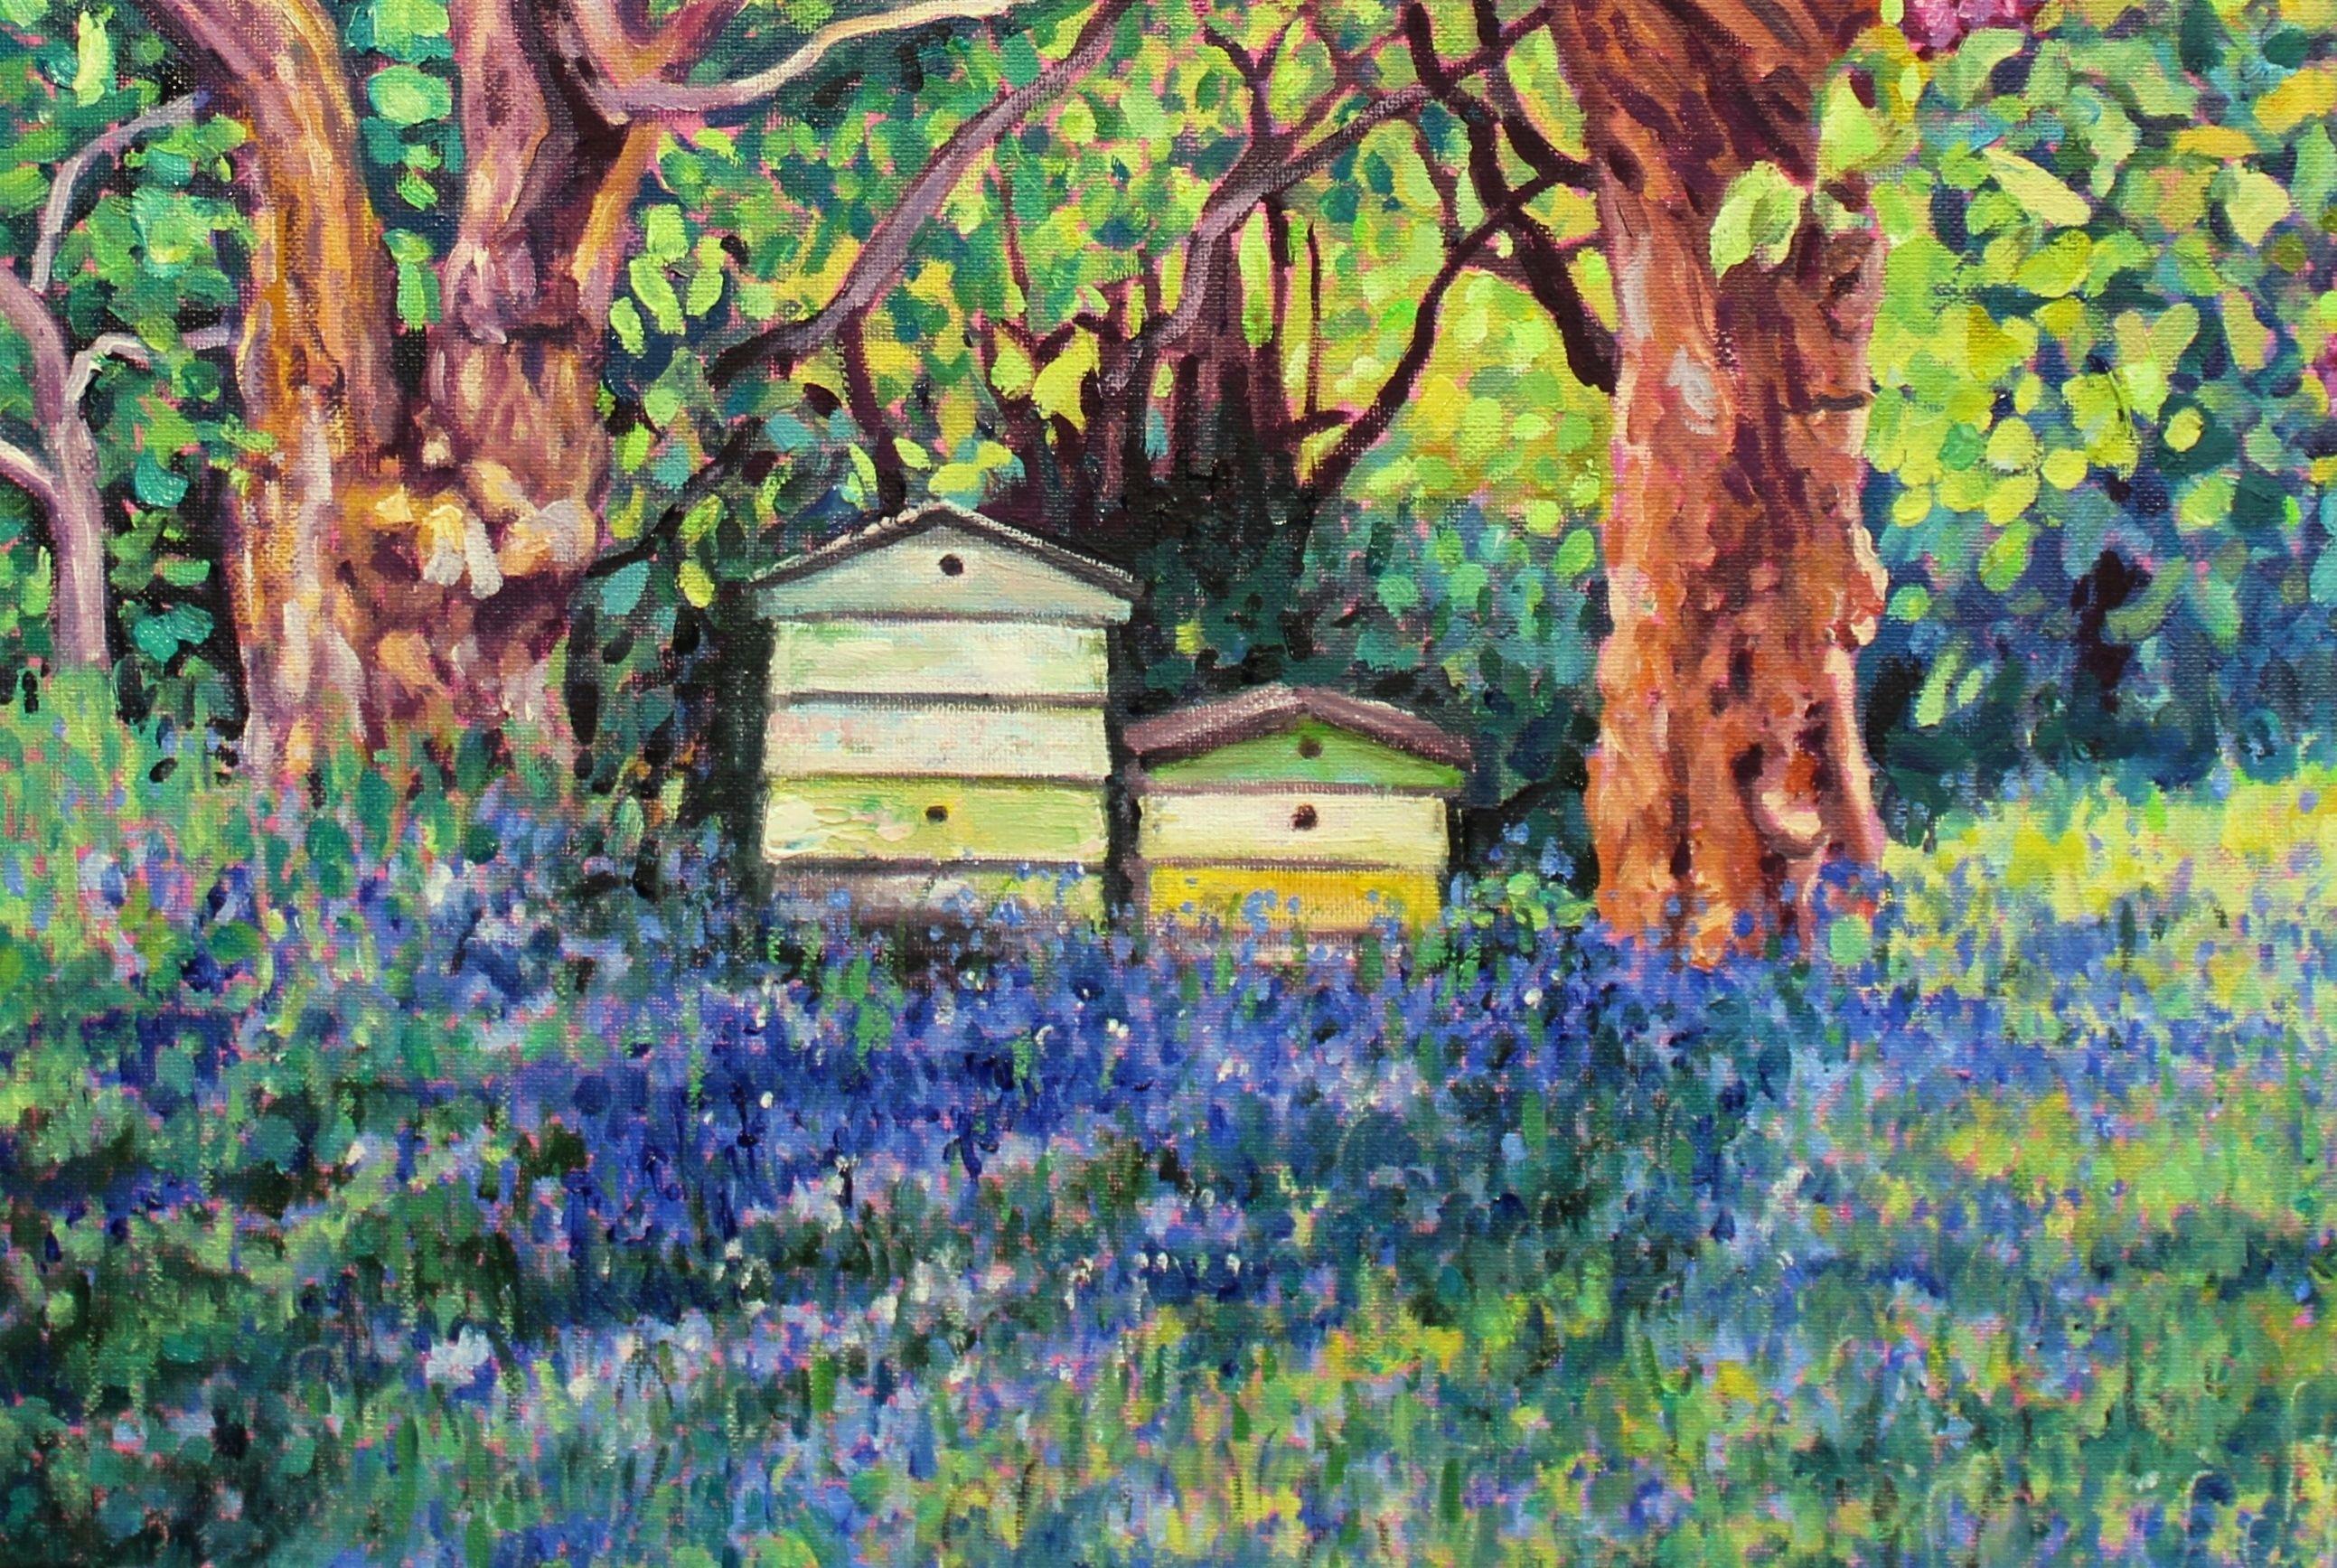 Contemporary Impressionism.    This was quite a complicated painting to complete with all the different elements. The painting is a lively contemporary depiction of an old country scene in spring. The bees are buzzing and collecting nectar from the